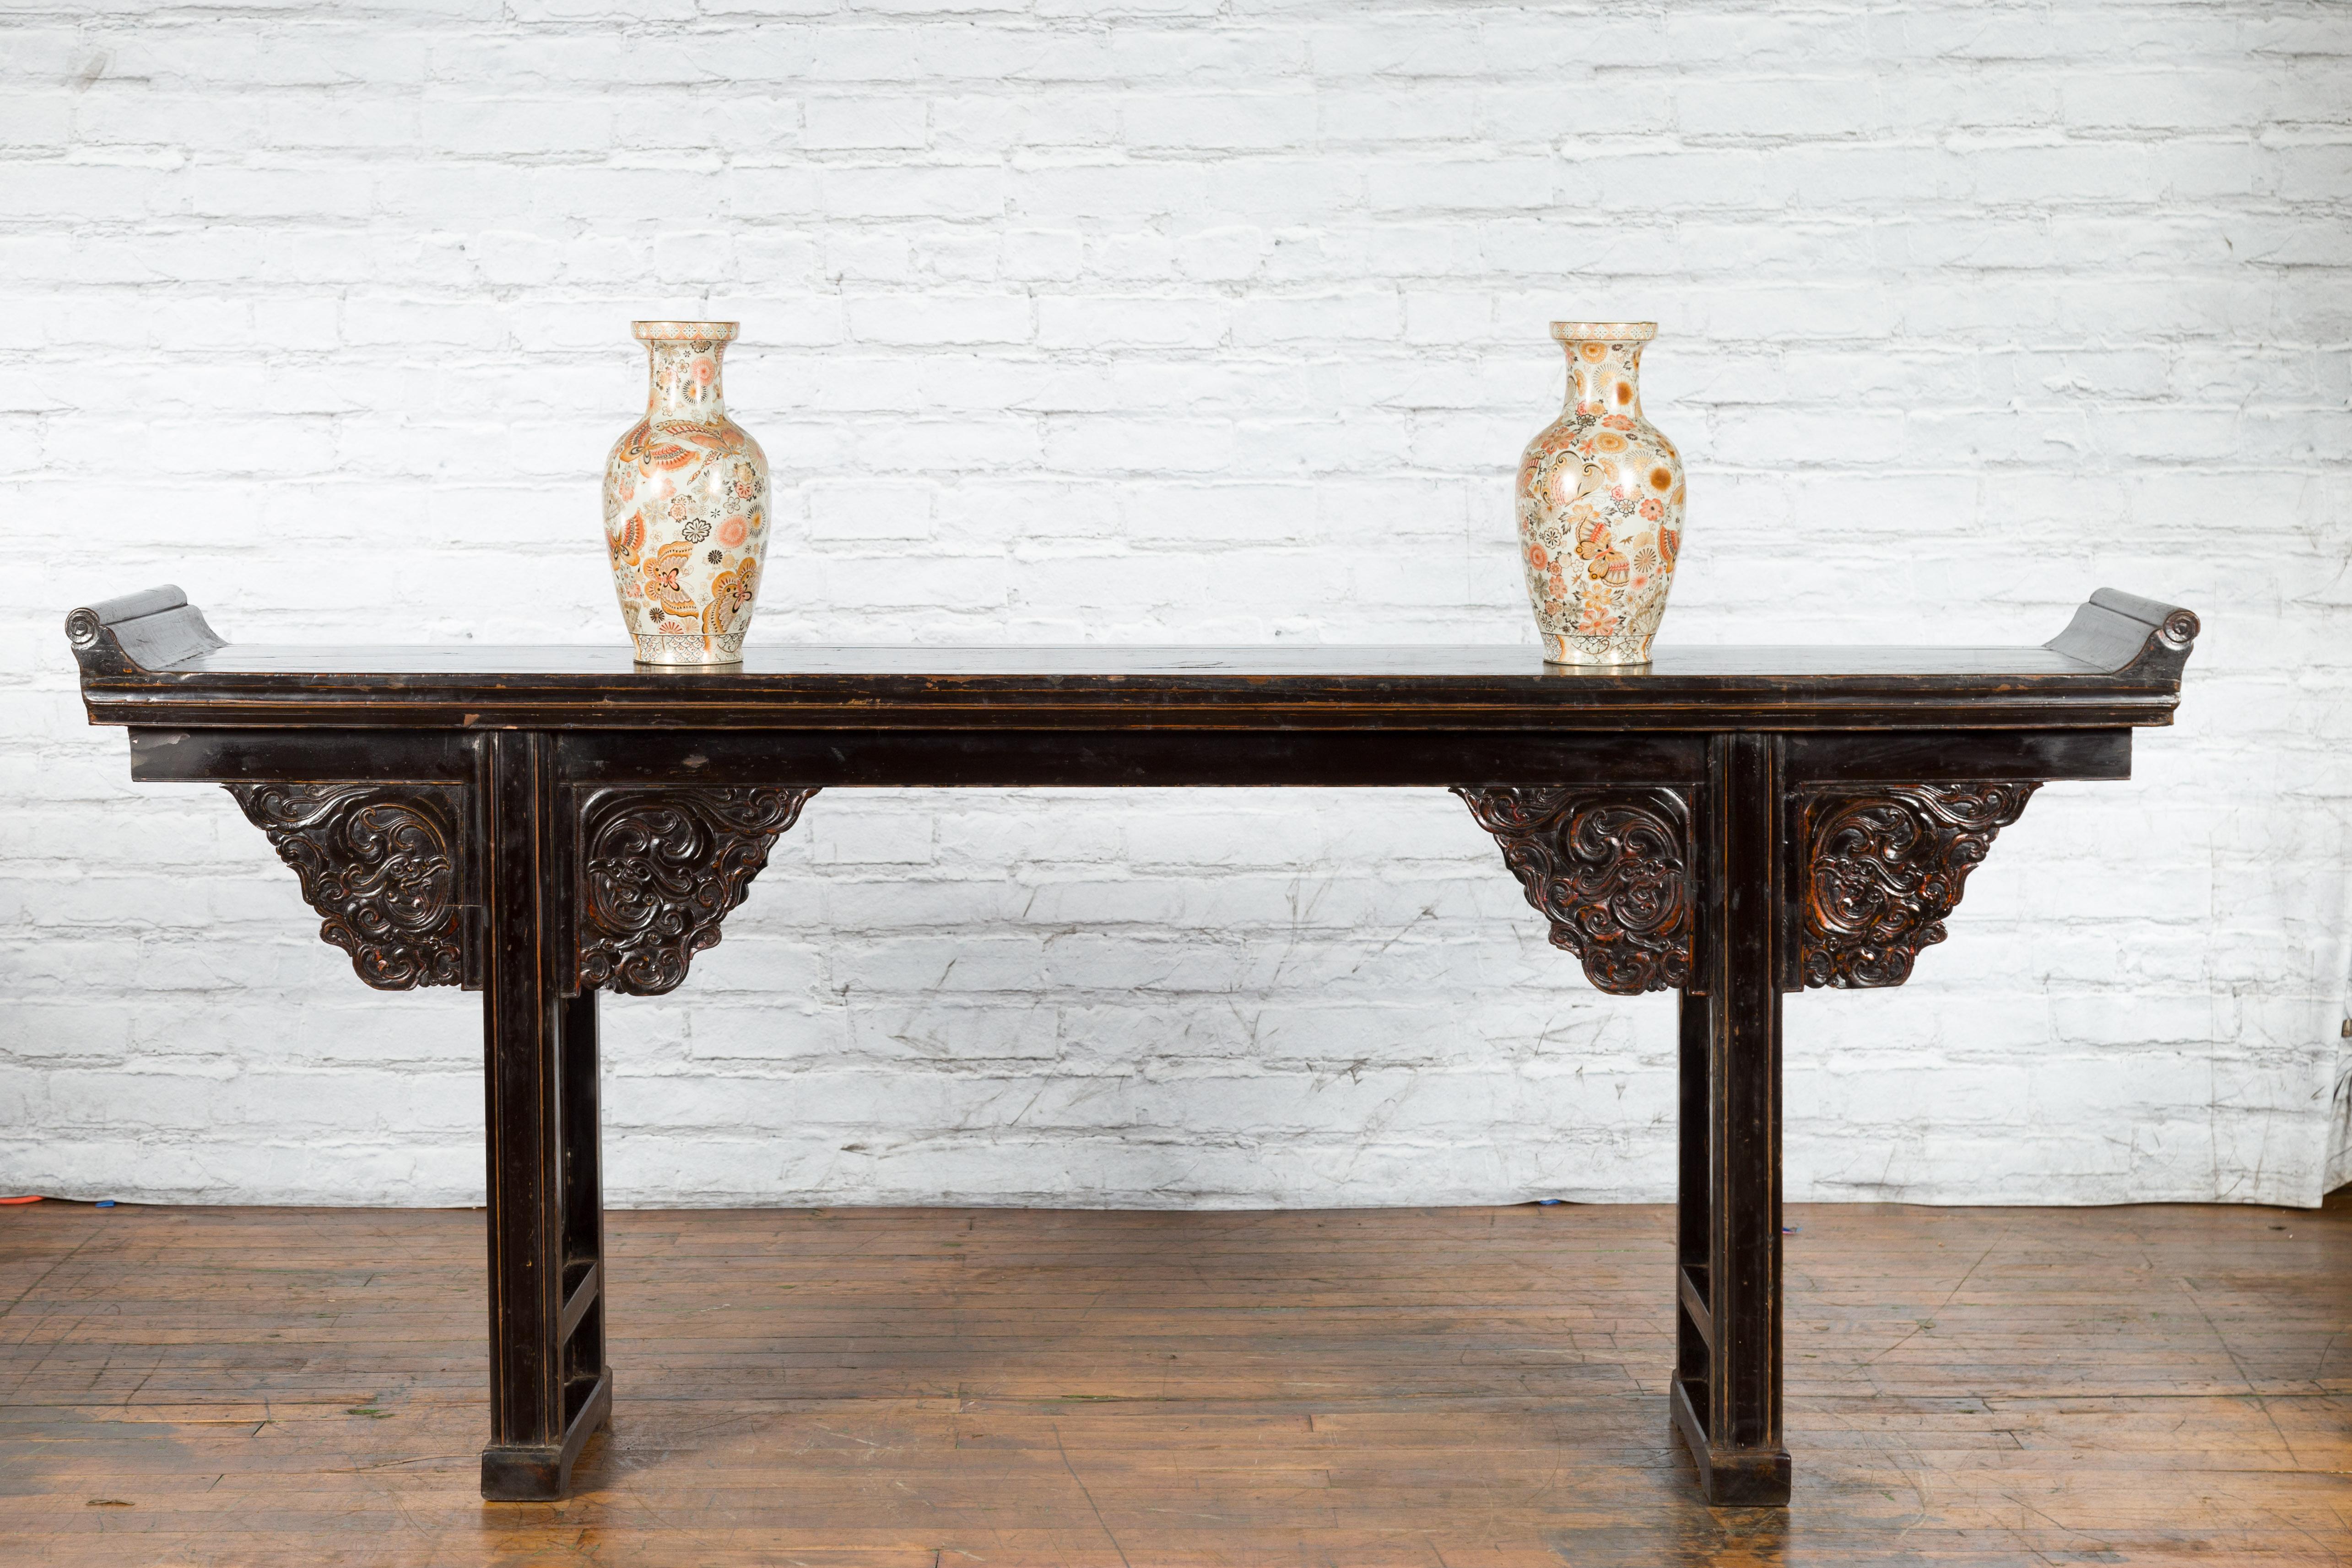 Chinese Qing Dynasty 19th Century Black Console Table with Carved Dragon Motifs In Good Condition For Sale In Yonkers, NY